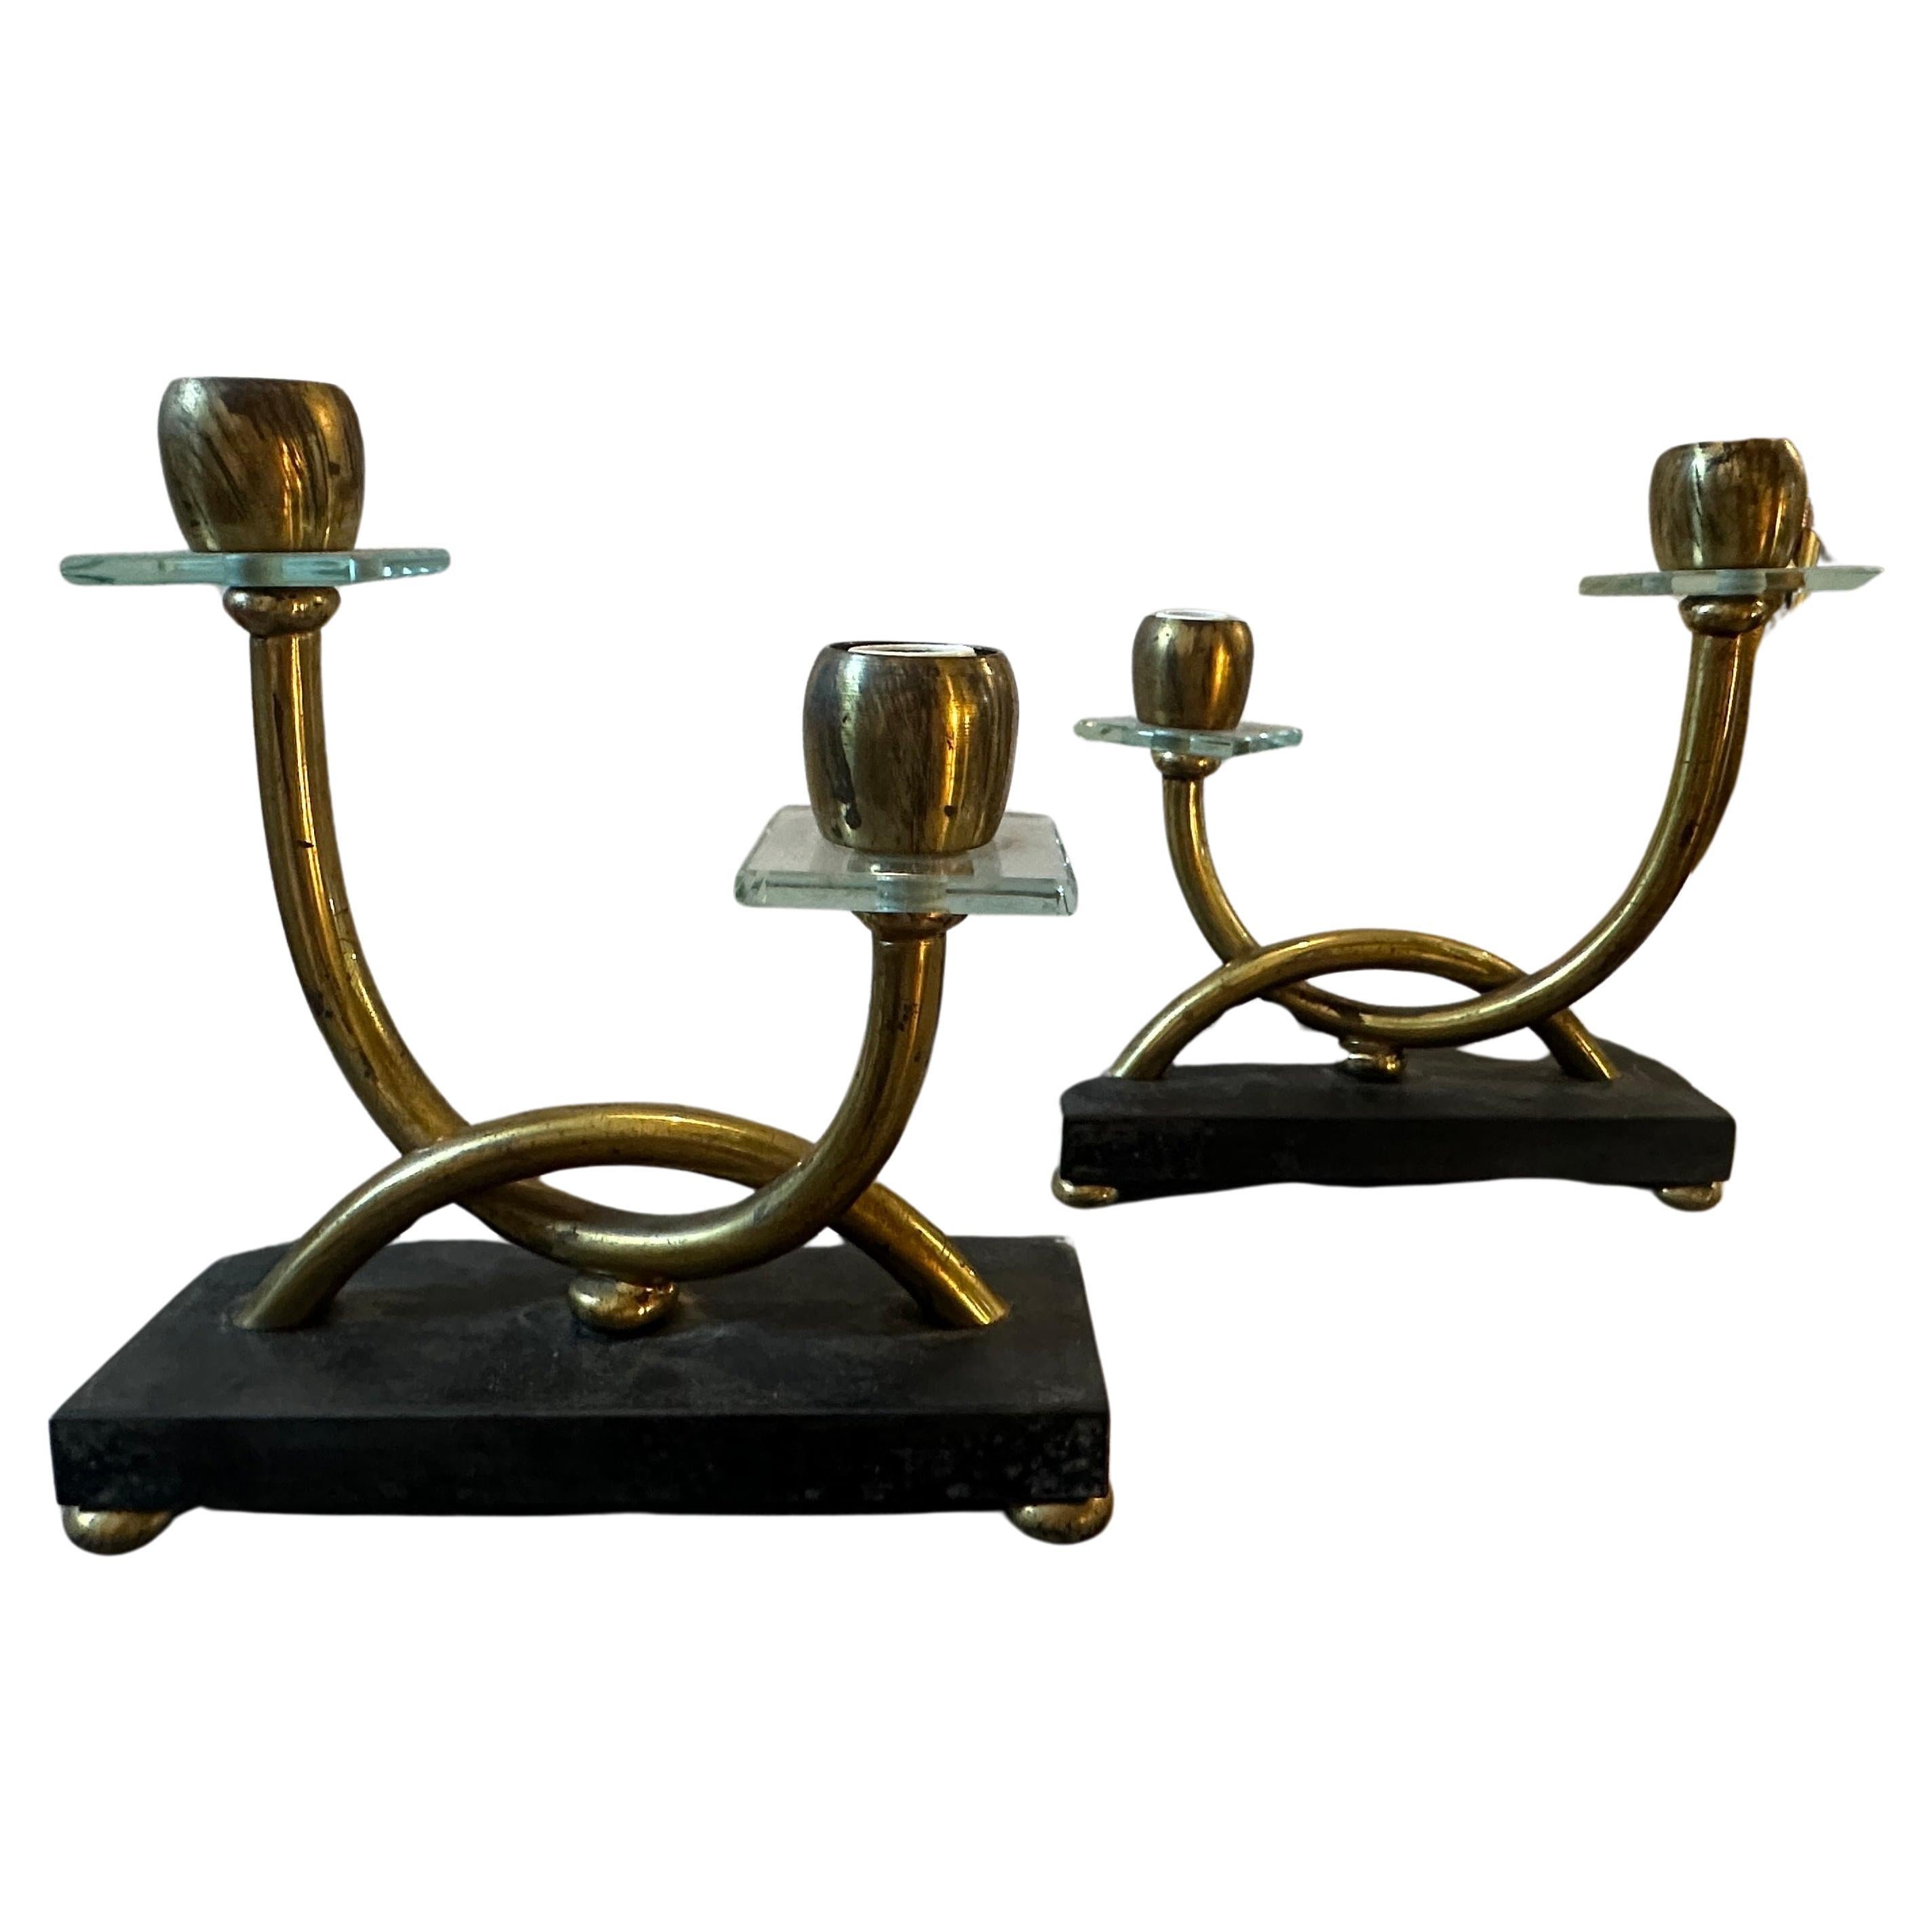 Two 1930s Giò Ponti style Art Deco Brass, Marble and Glass Italian Table Lamps